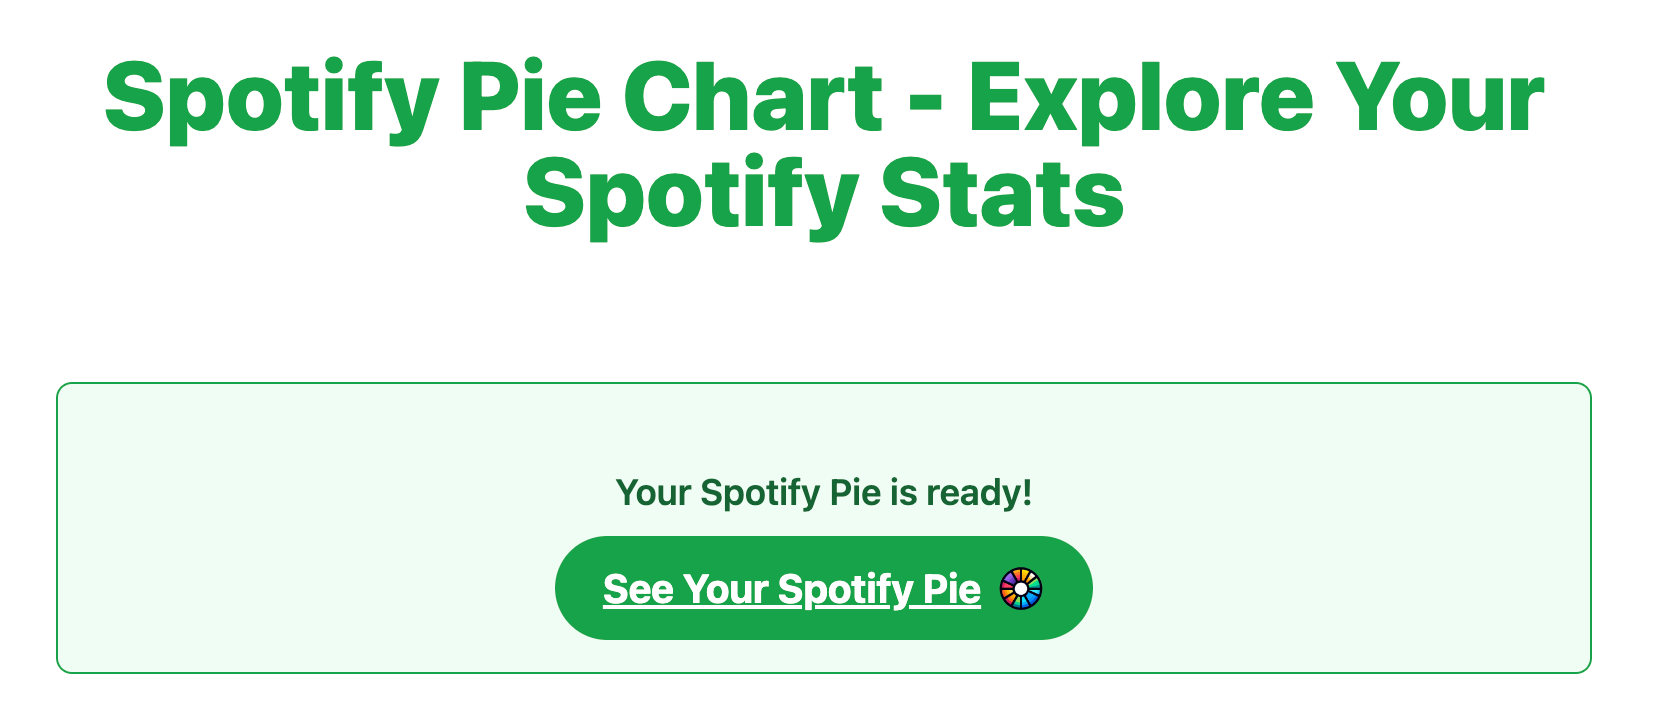 sceen displaying that Spotify Pie chart is ready